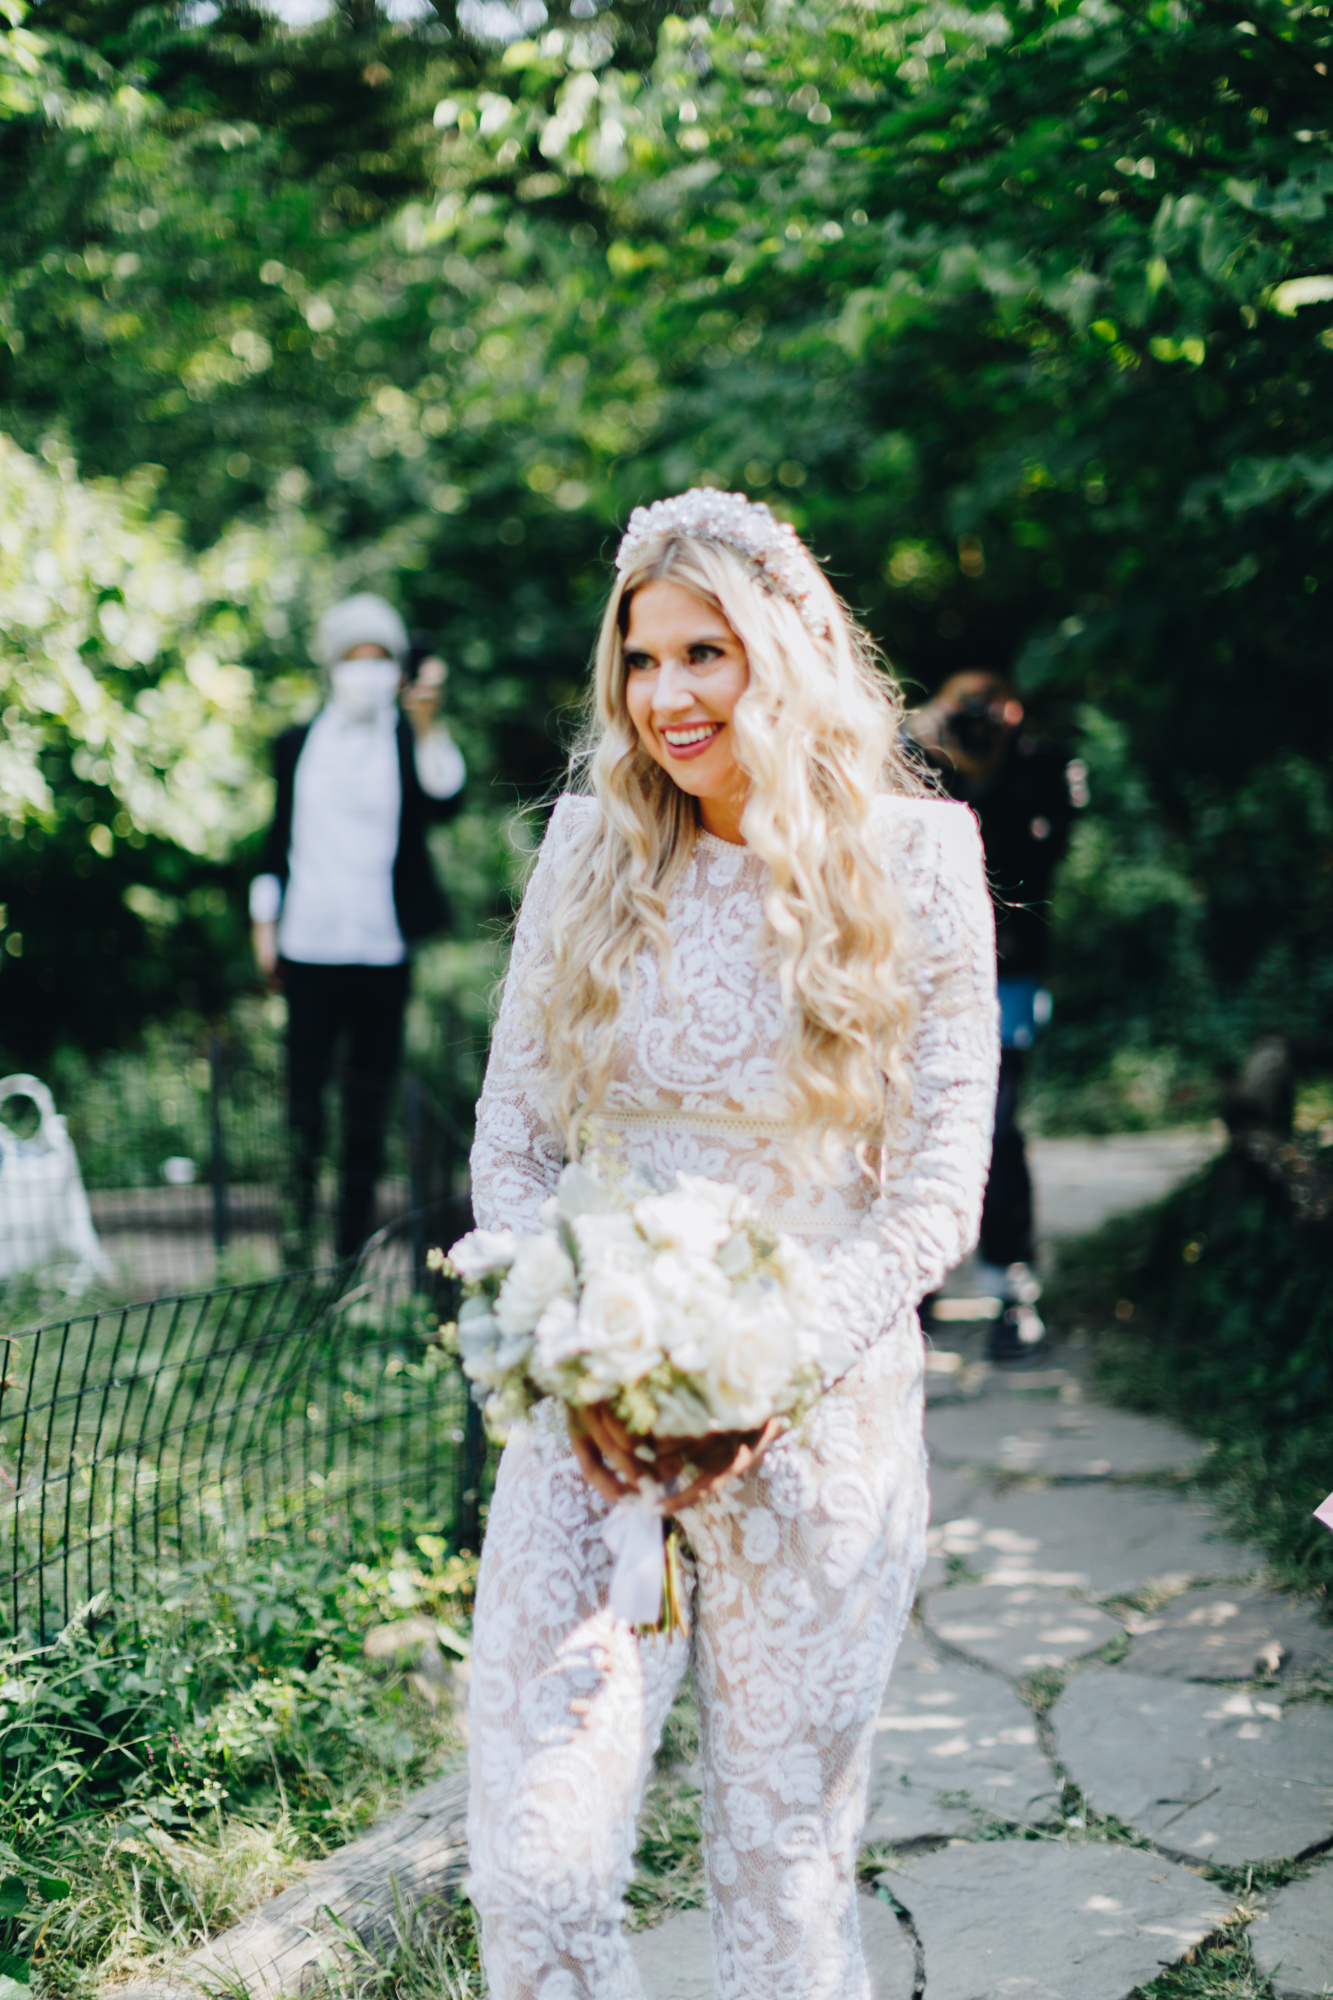 Loving Wagner Cove Elopement in Central Park